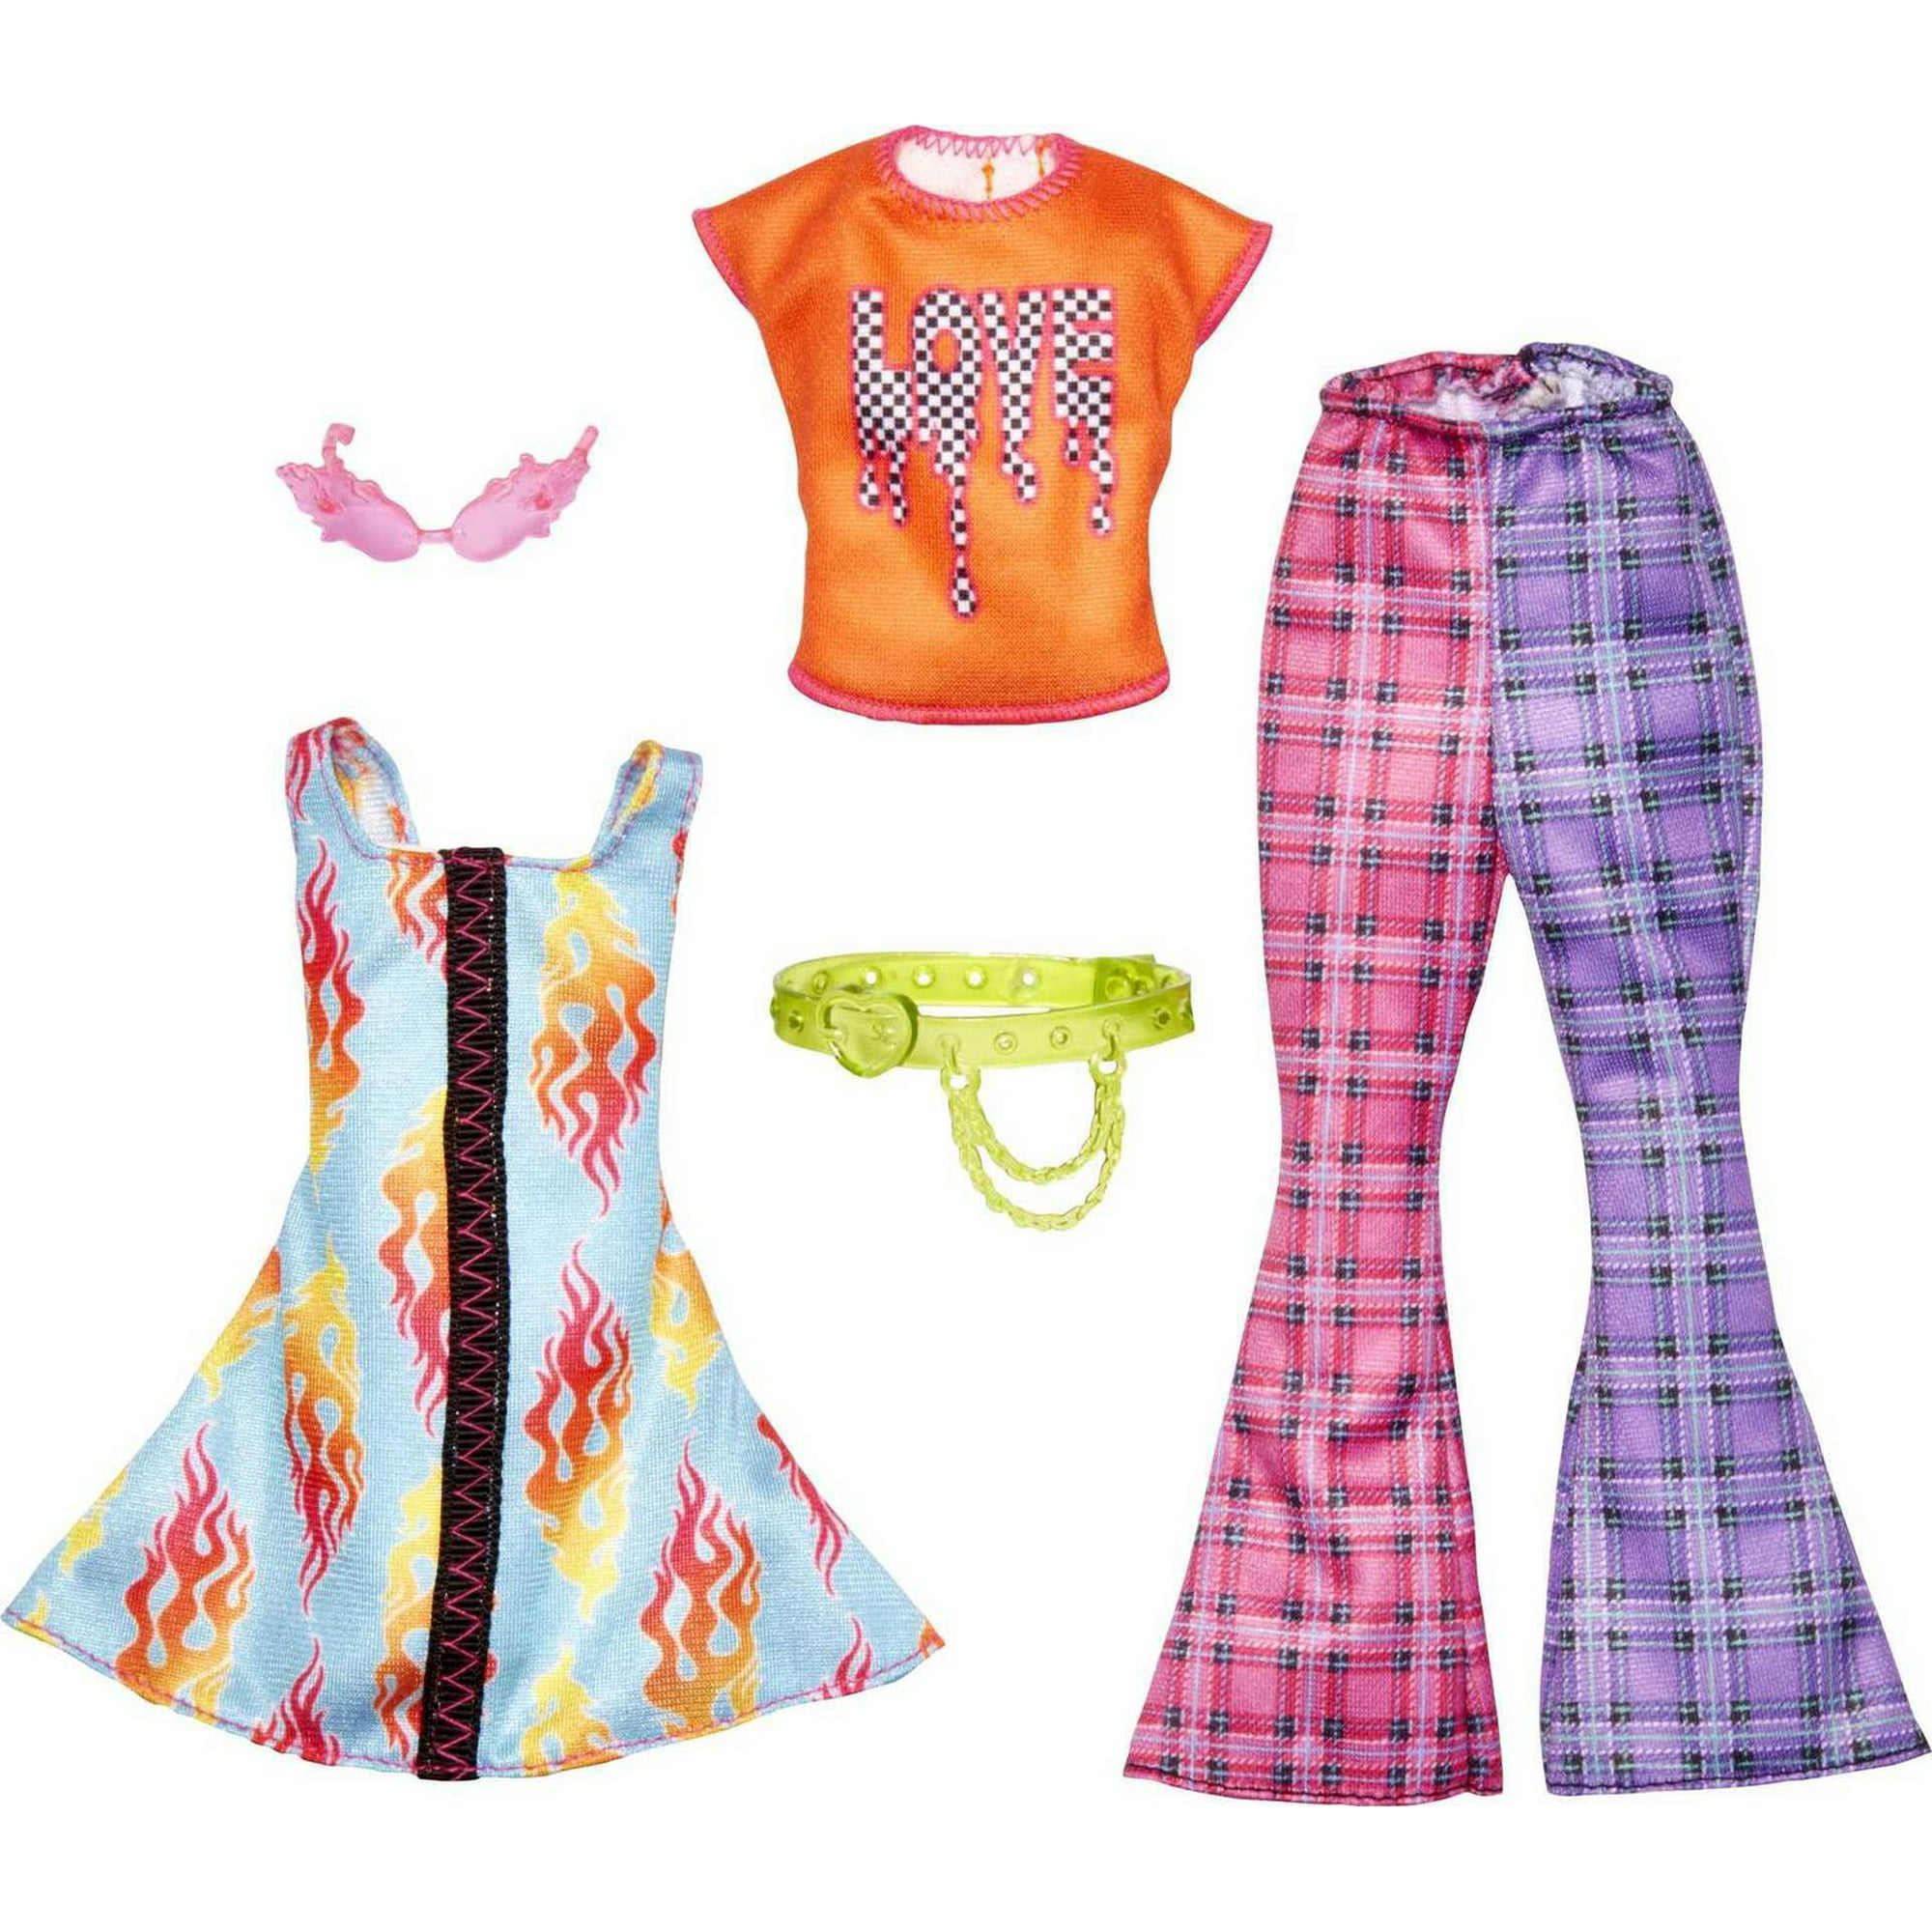 Barbie Clothes, Rocker-Themed Fashion and Accessory 2-Pack for